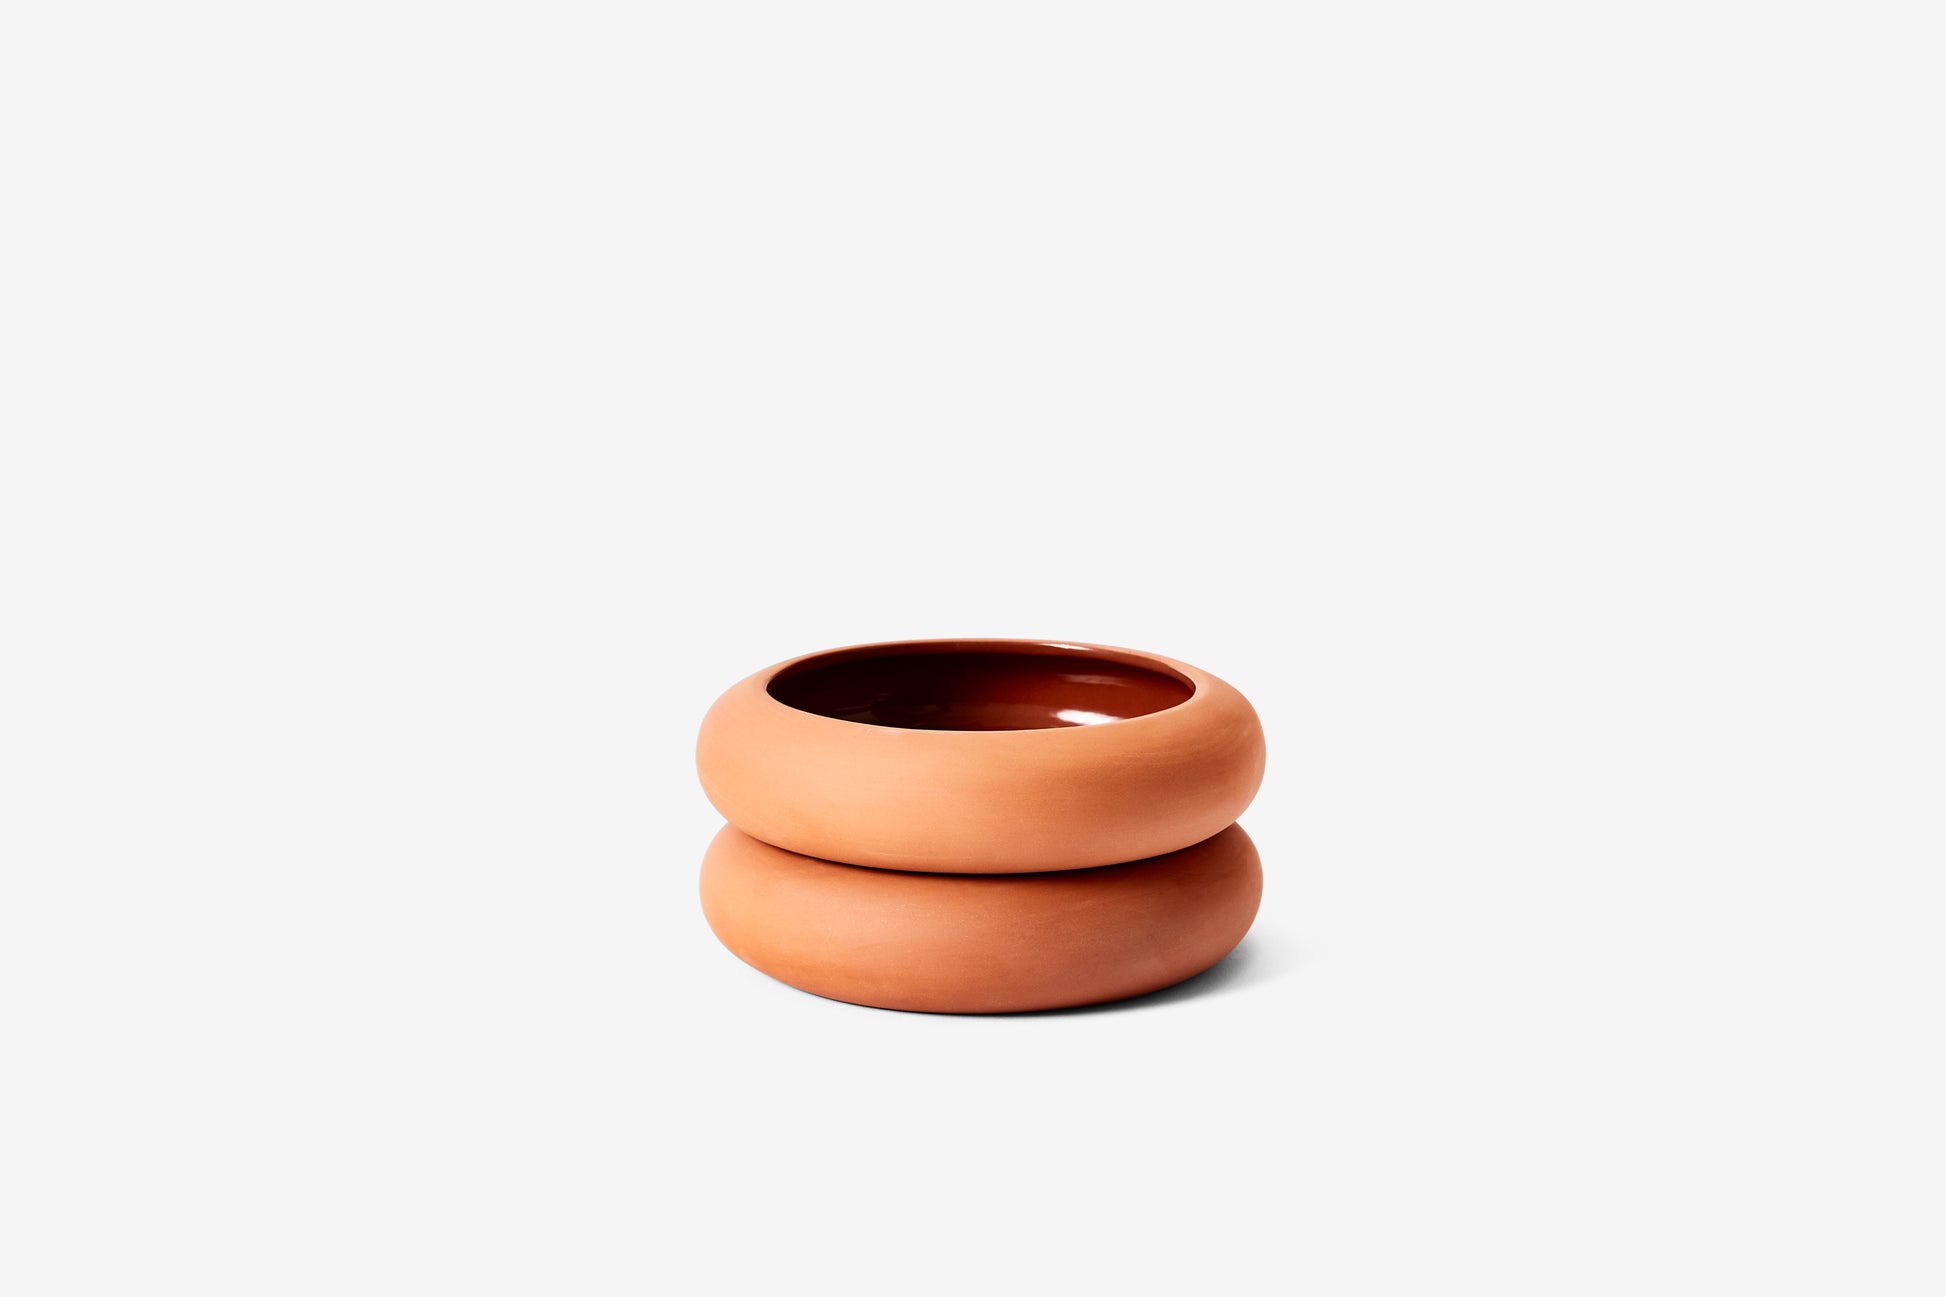 Empty terracotta planter made up of two rounded sections.